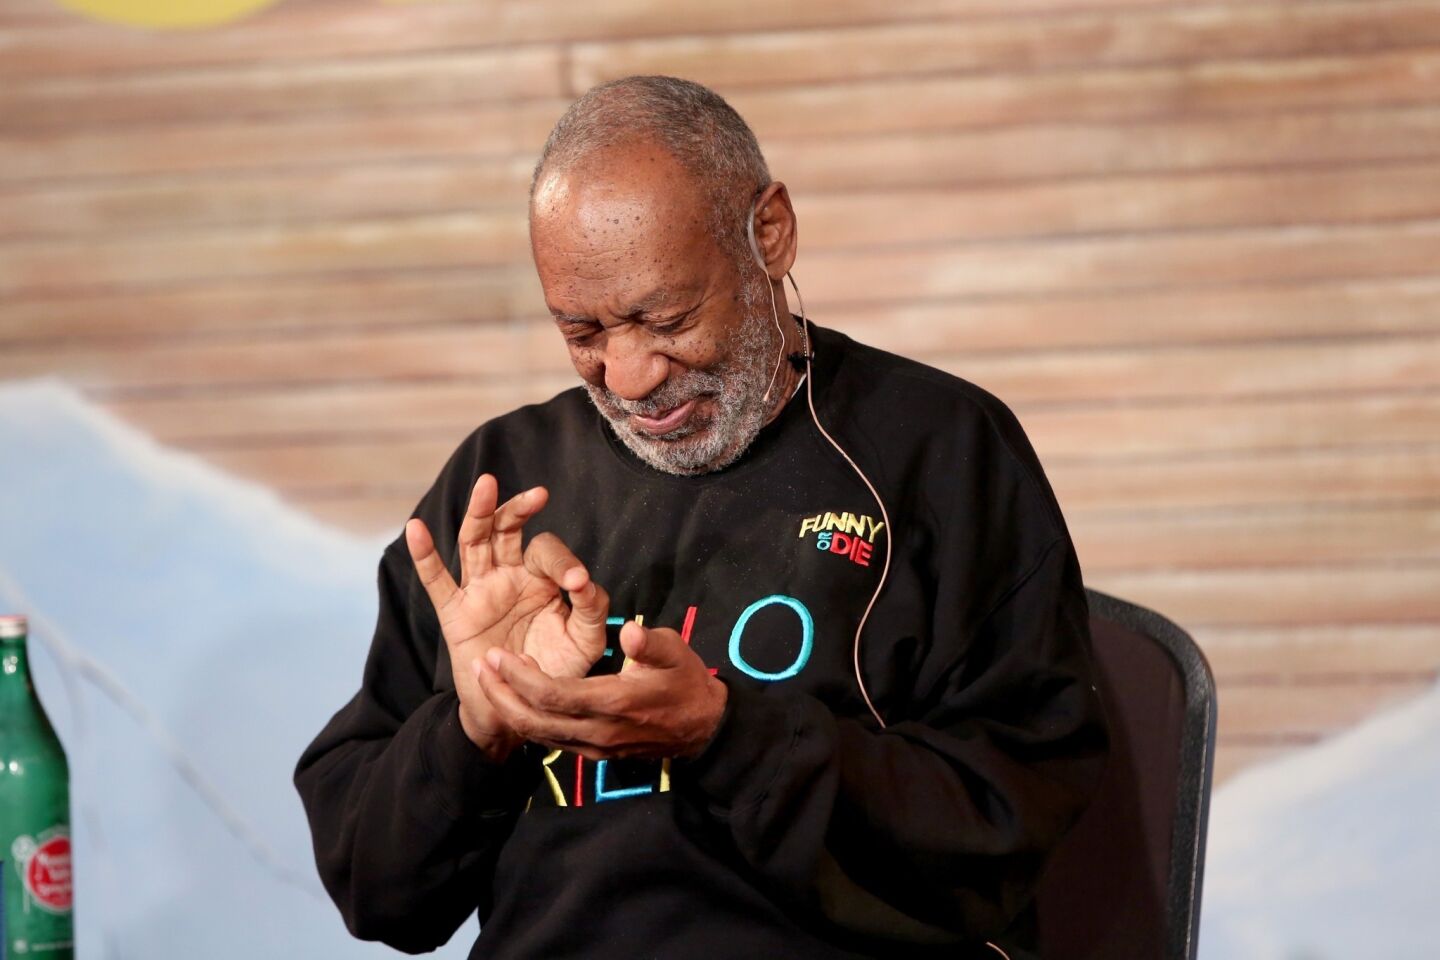 Actor/comedian Bill Cosby performs at the Funny Or Die Clubhouse + Facebook Pop-Up HQ.